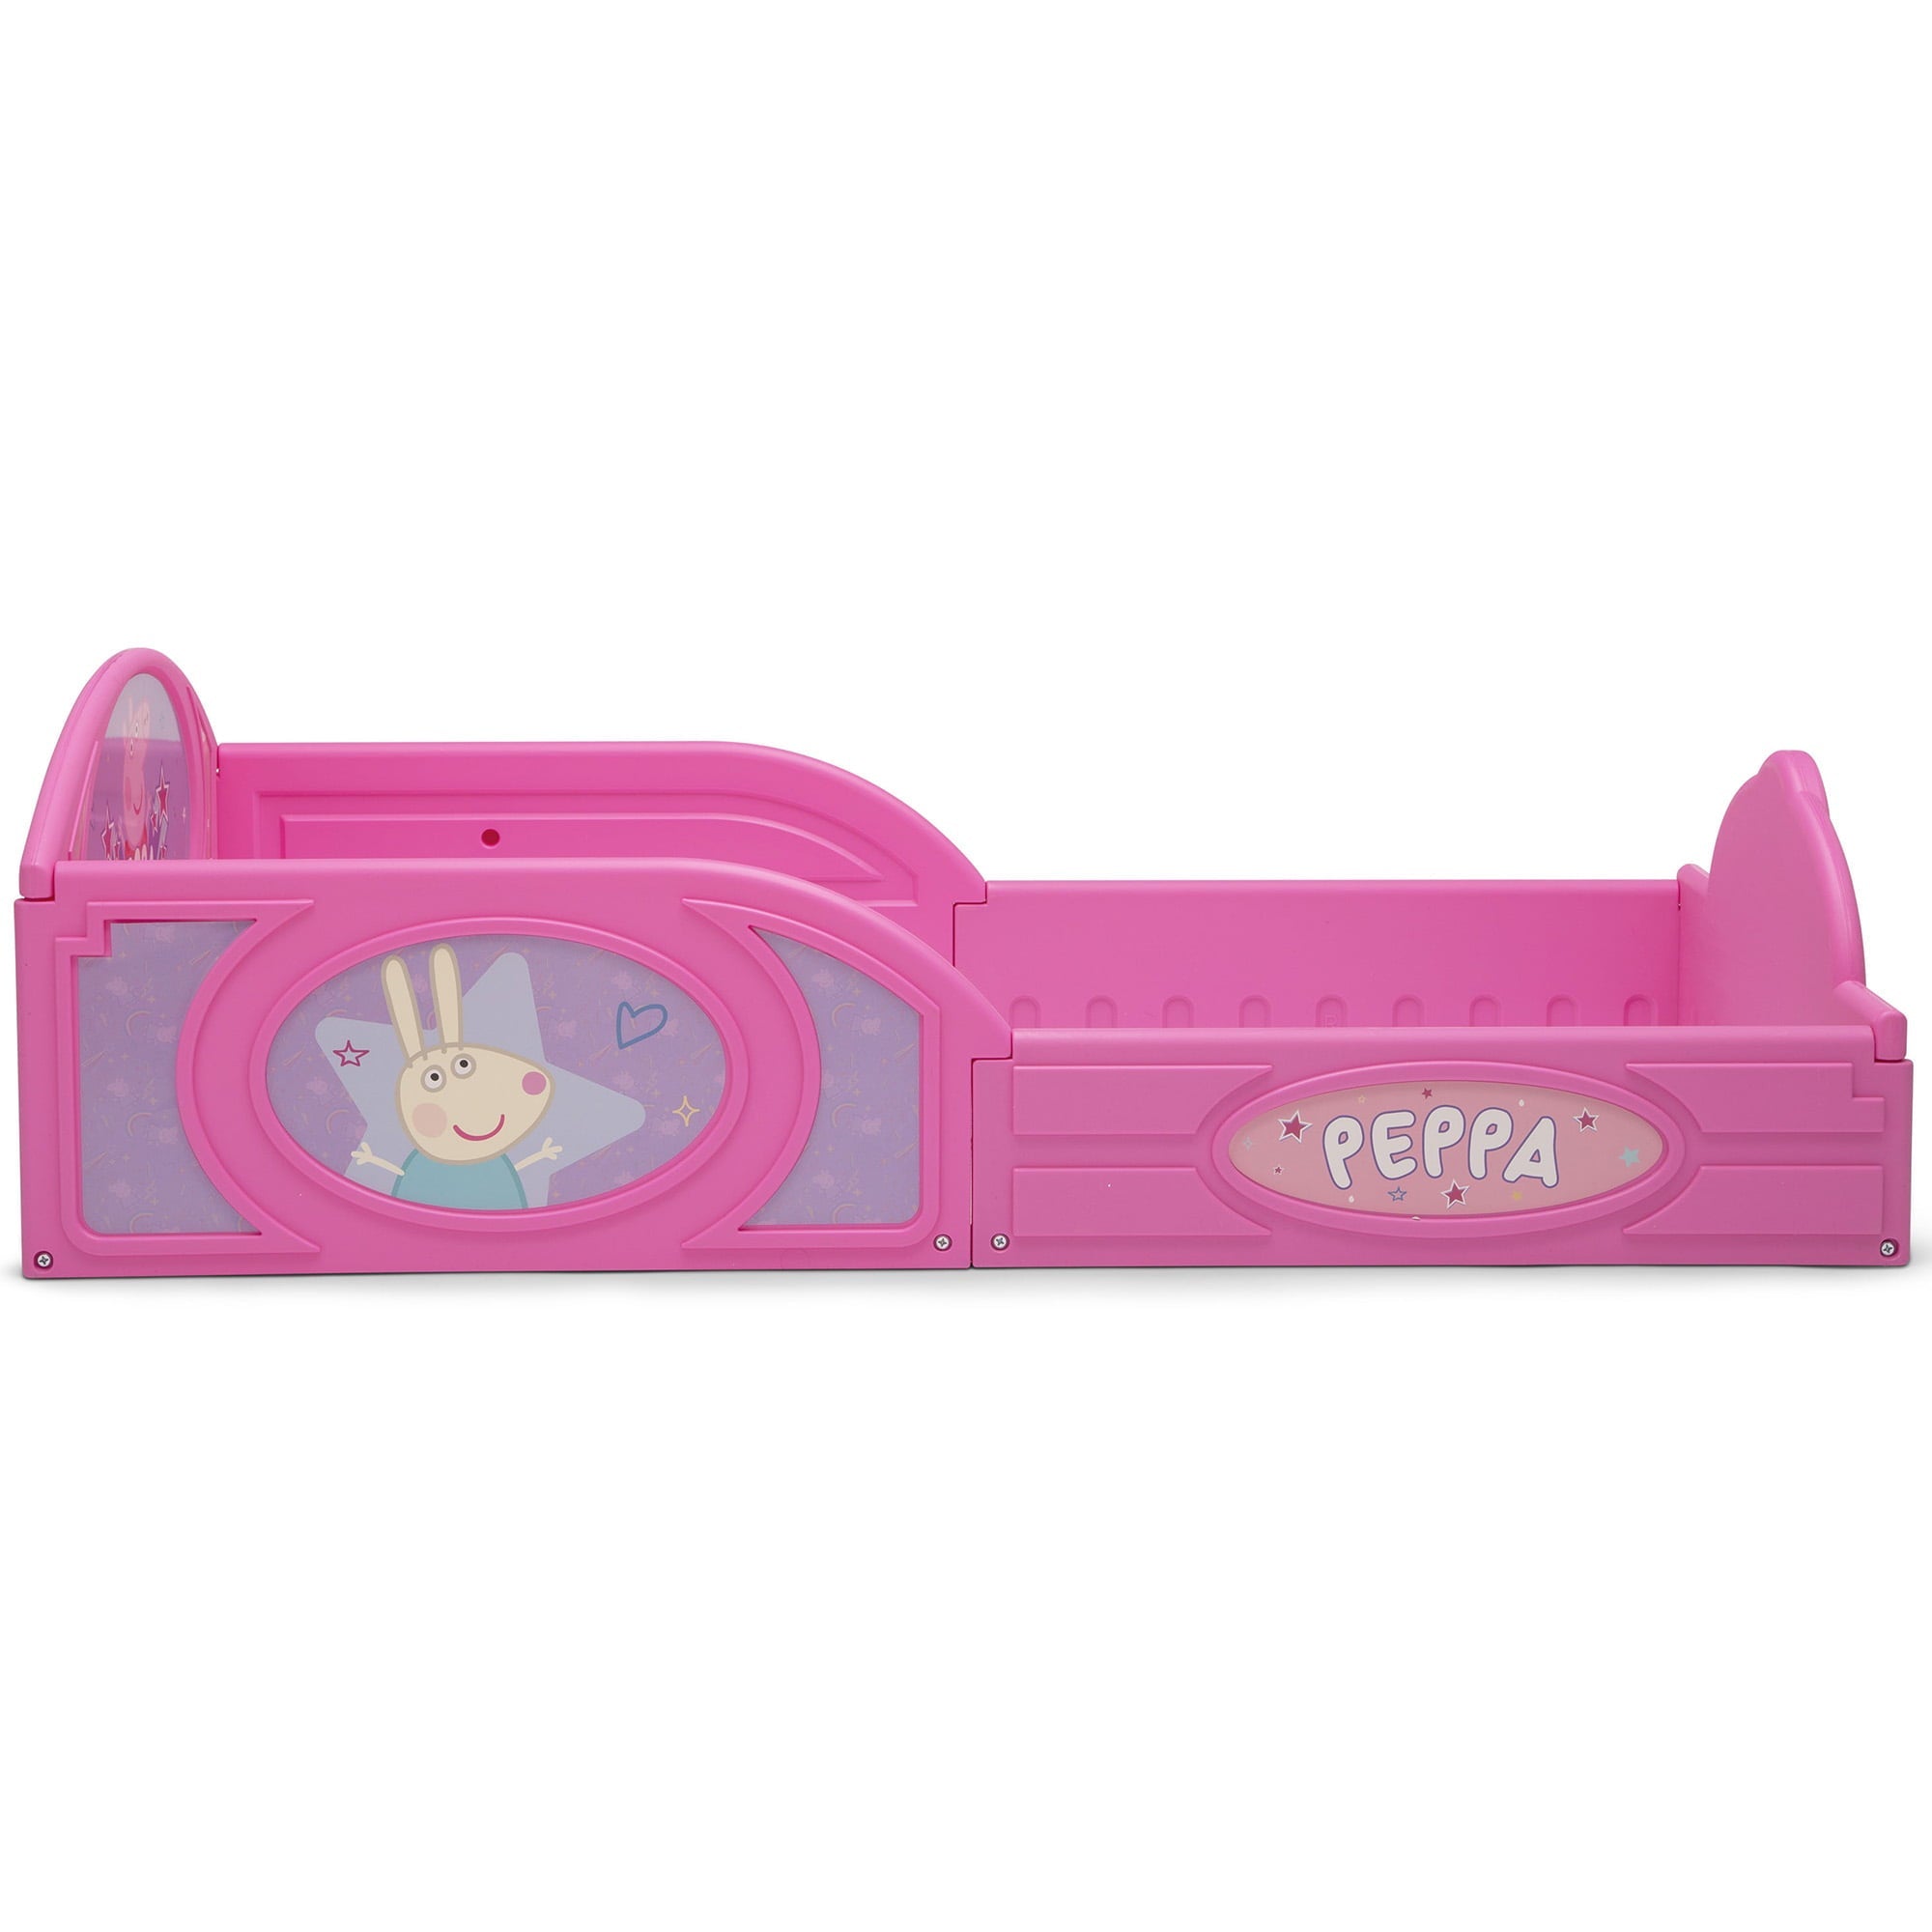 Peppa Pig Plastic Sleep and Play Toddler Bed by Delta Children